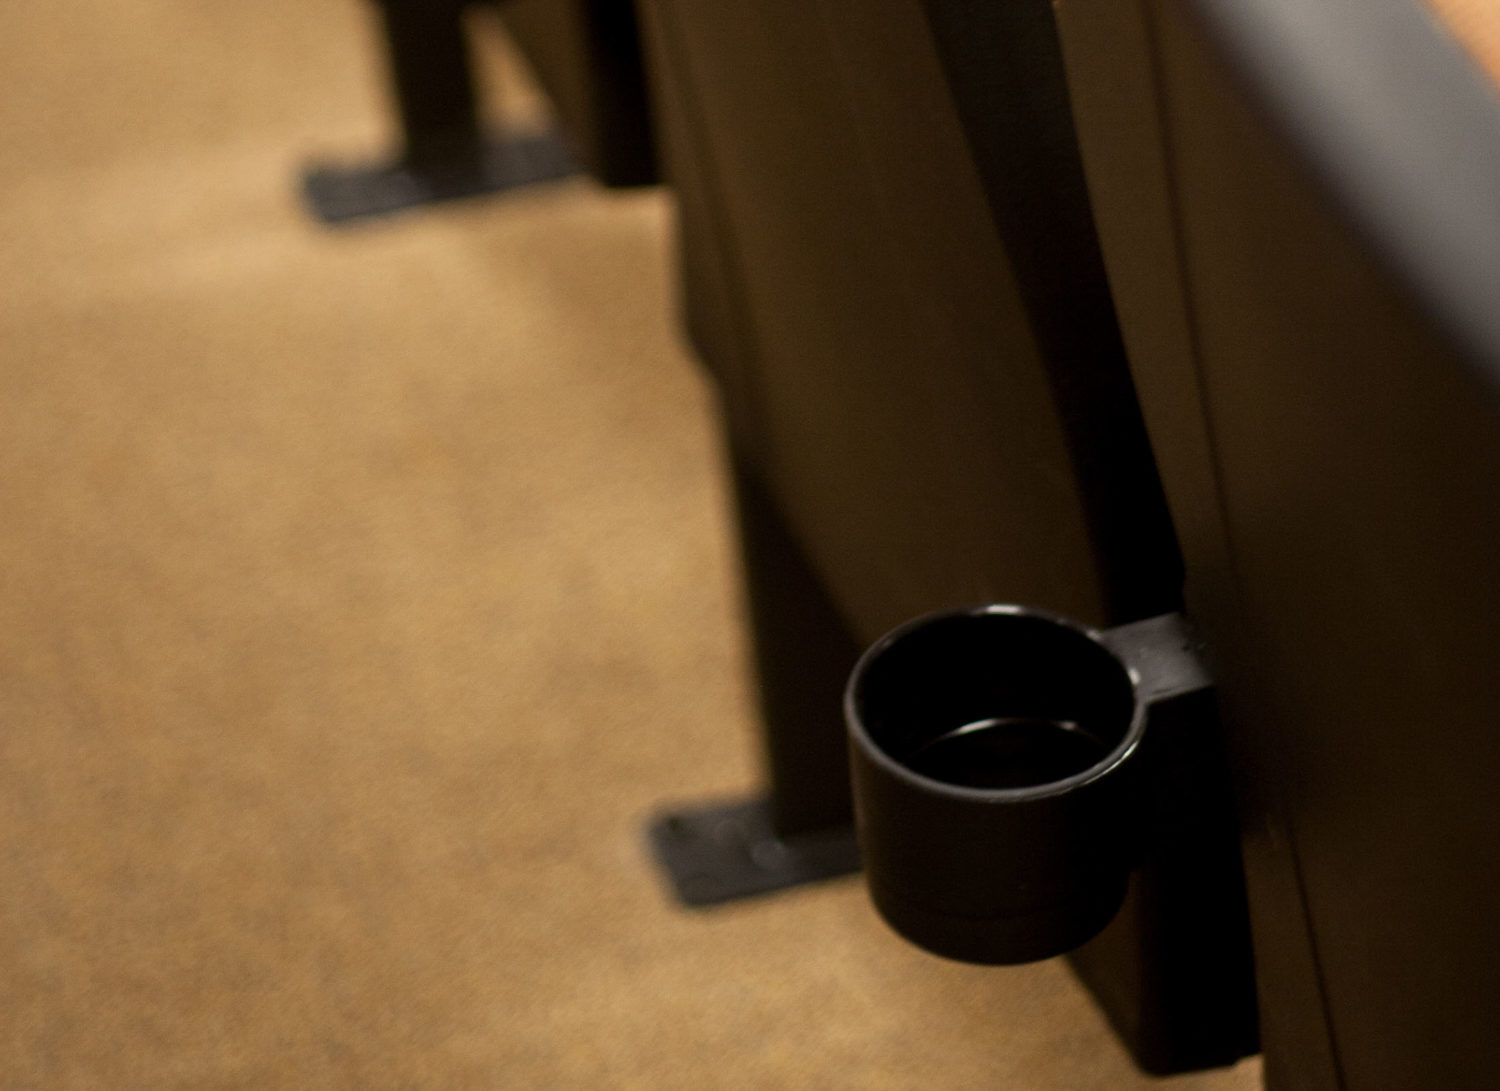 Cup Holder Options and Accessories on Auditorium Seating in Frank Crowley Court - Dallas, TX